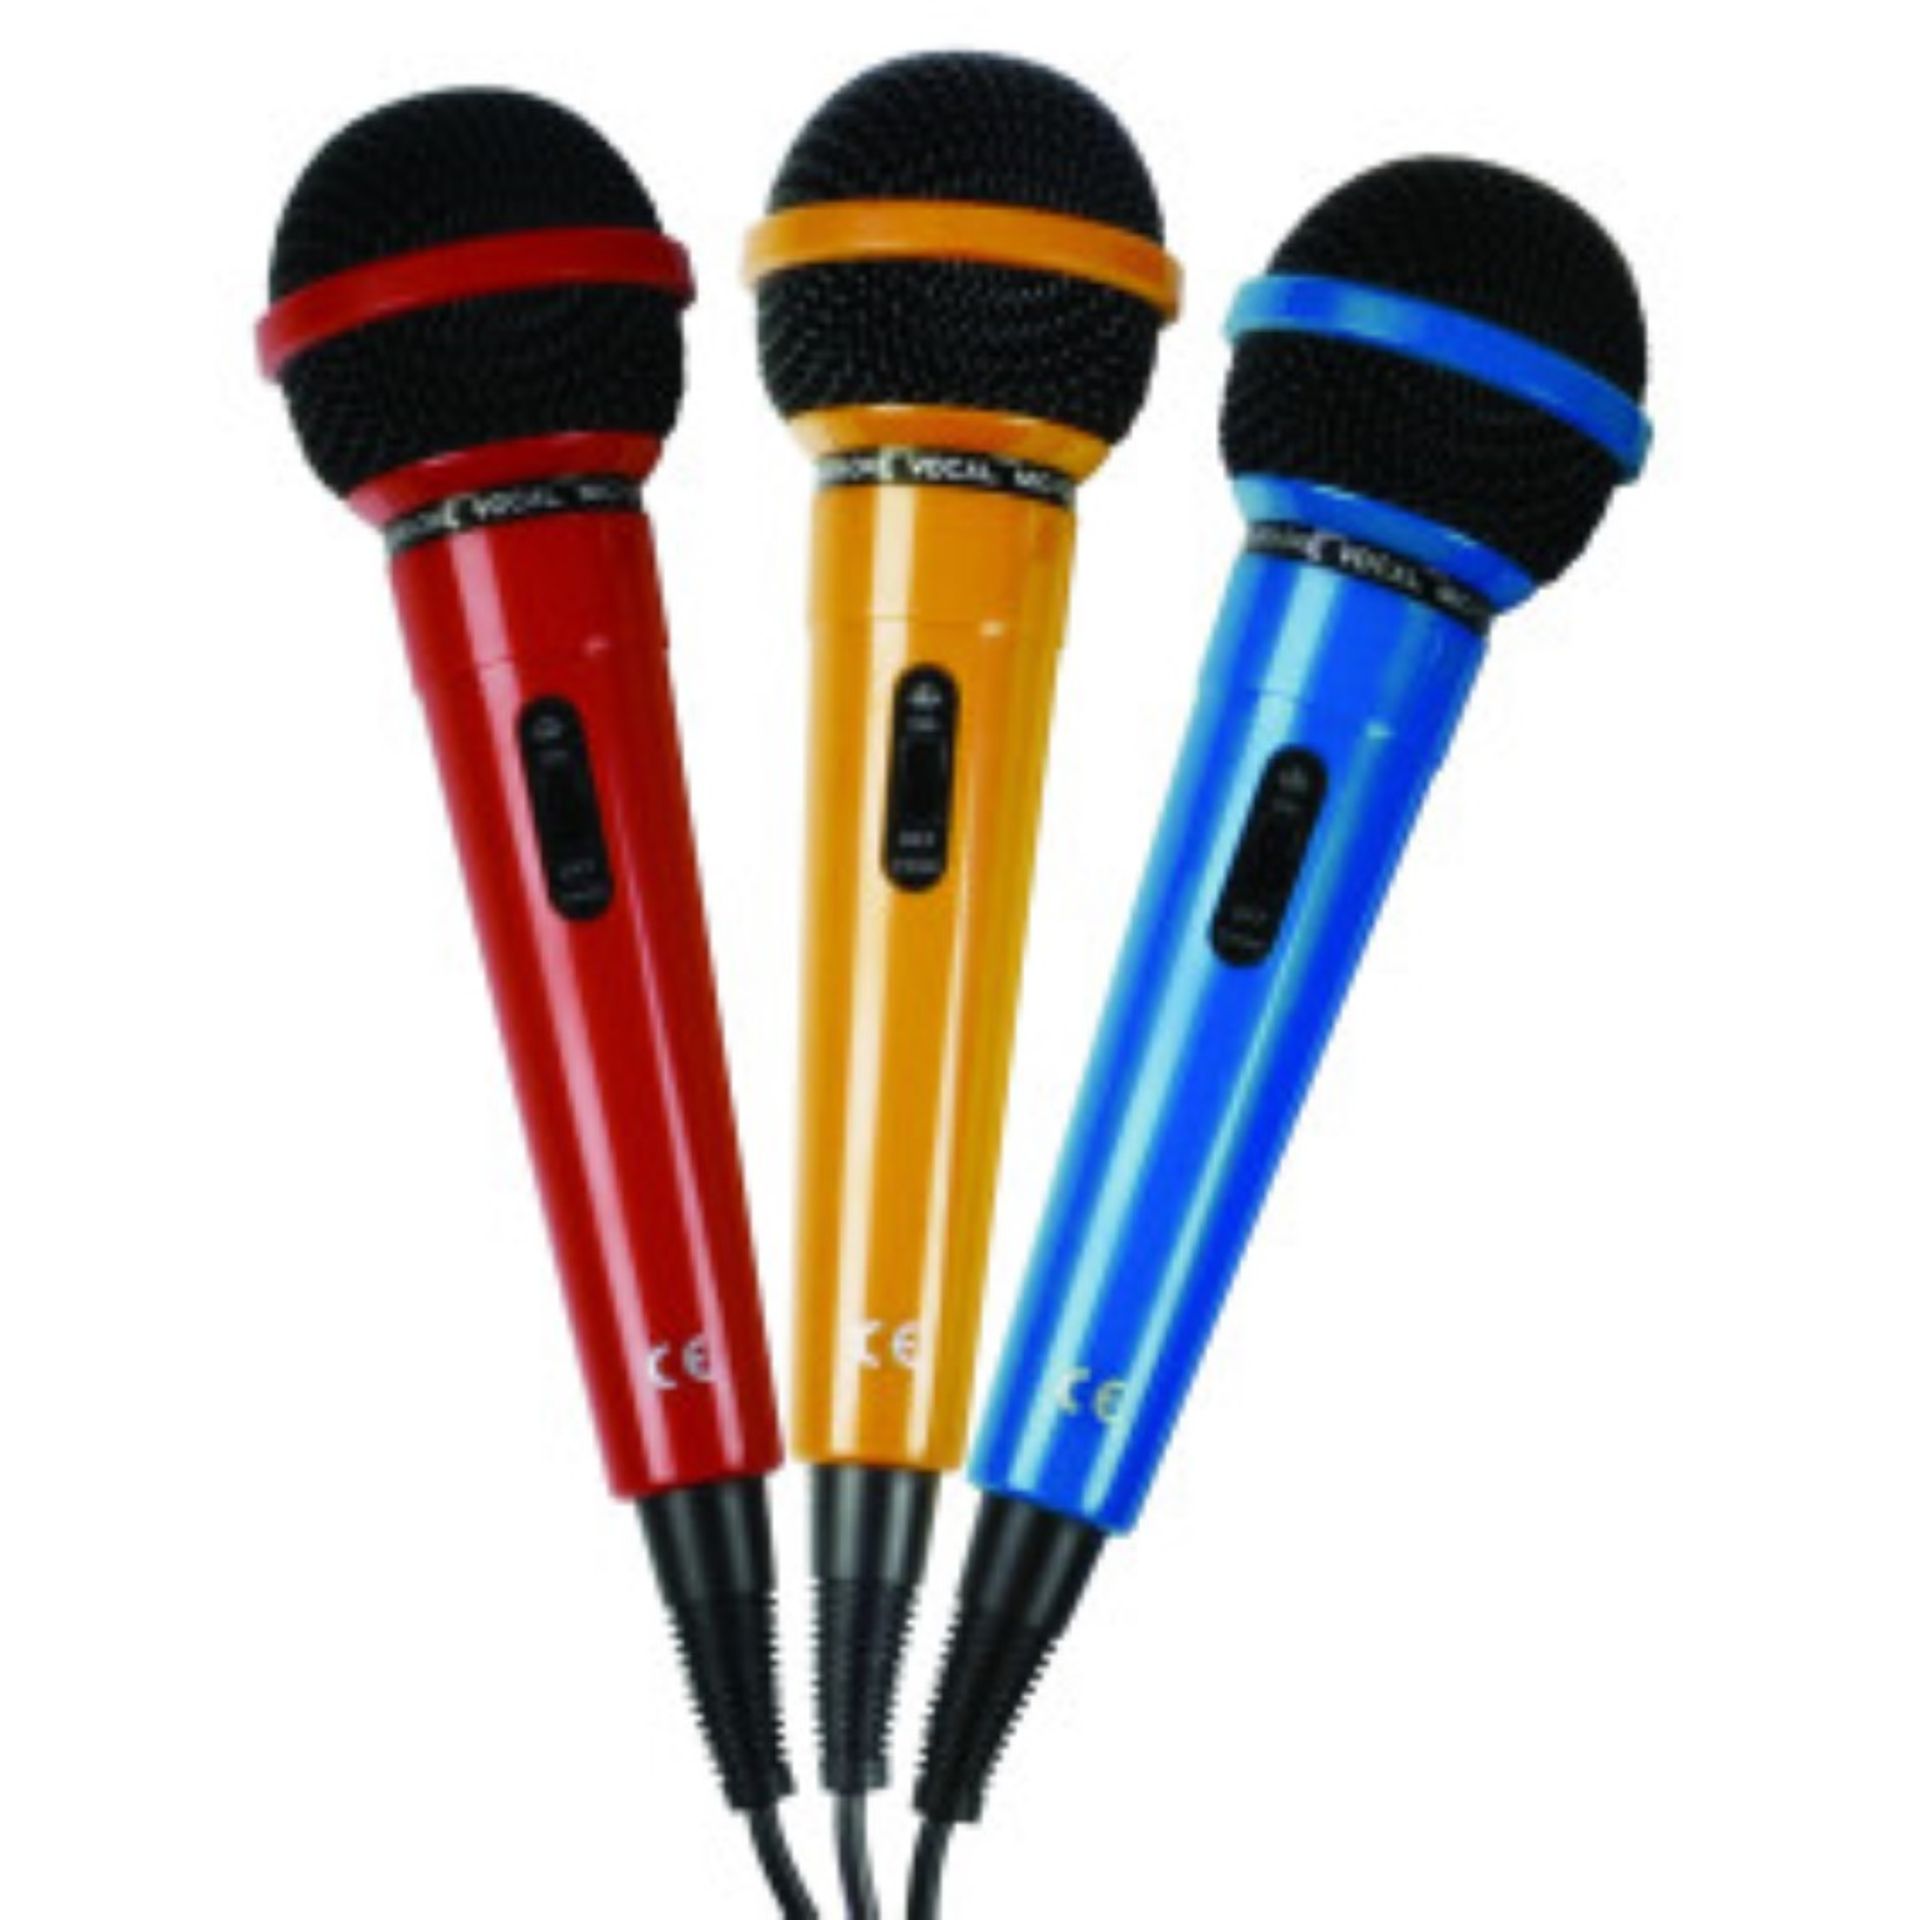 5 x Handheld Dynamic Microphone Sets - Includes 5 Sets of 3 Microphones - Ideal For Karaoke -